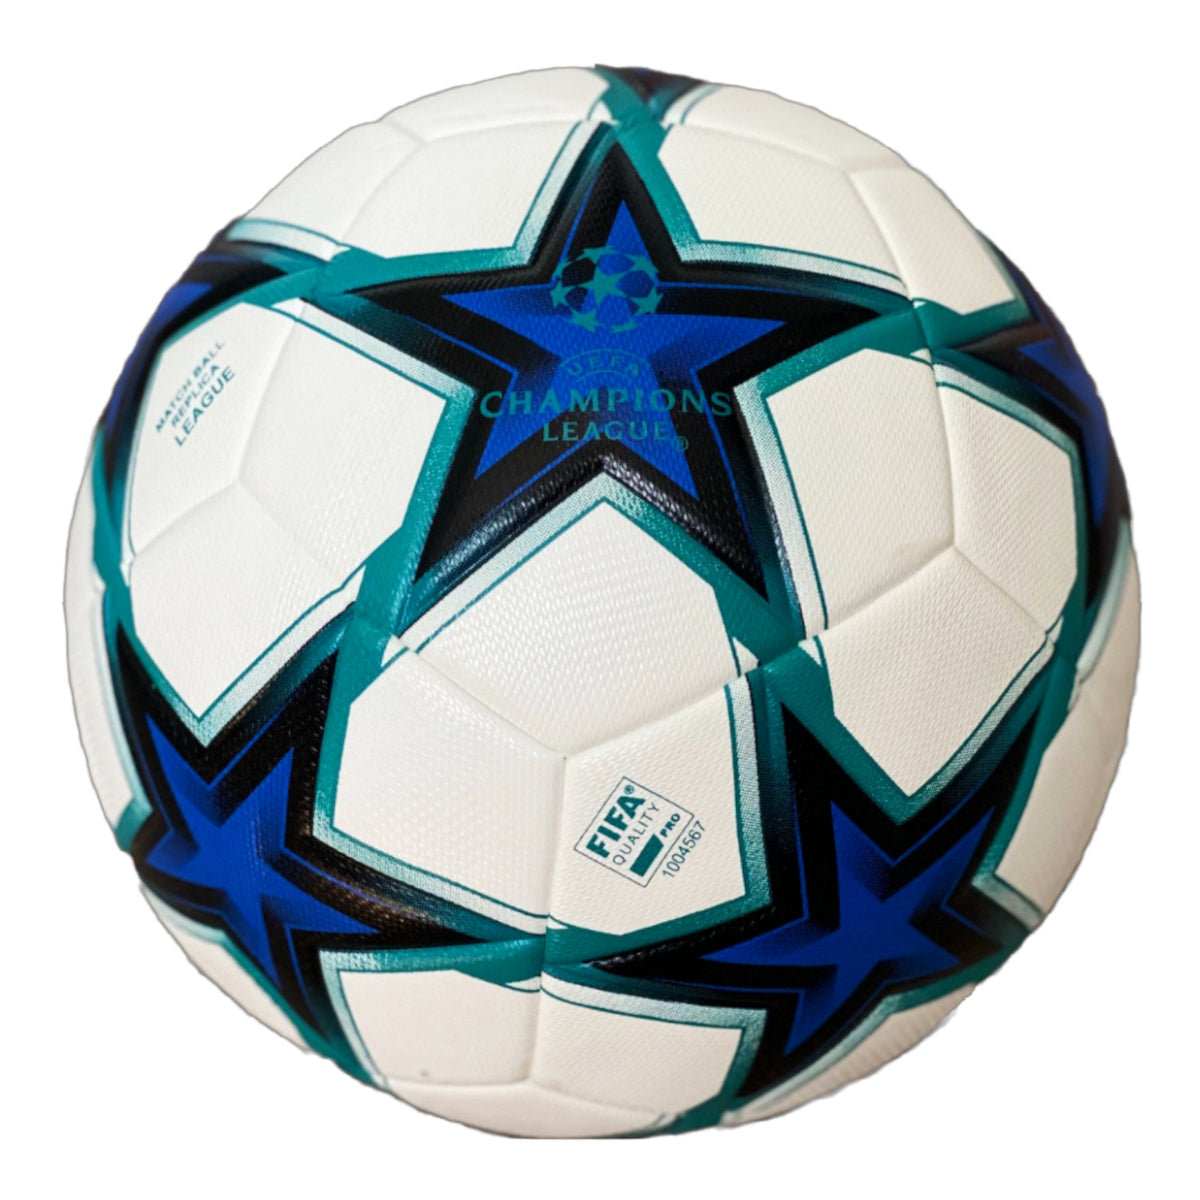 Soccer Ball Size 5 Pack of 10 Champions League for Training White Blue Black Solo